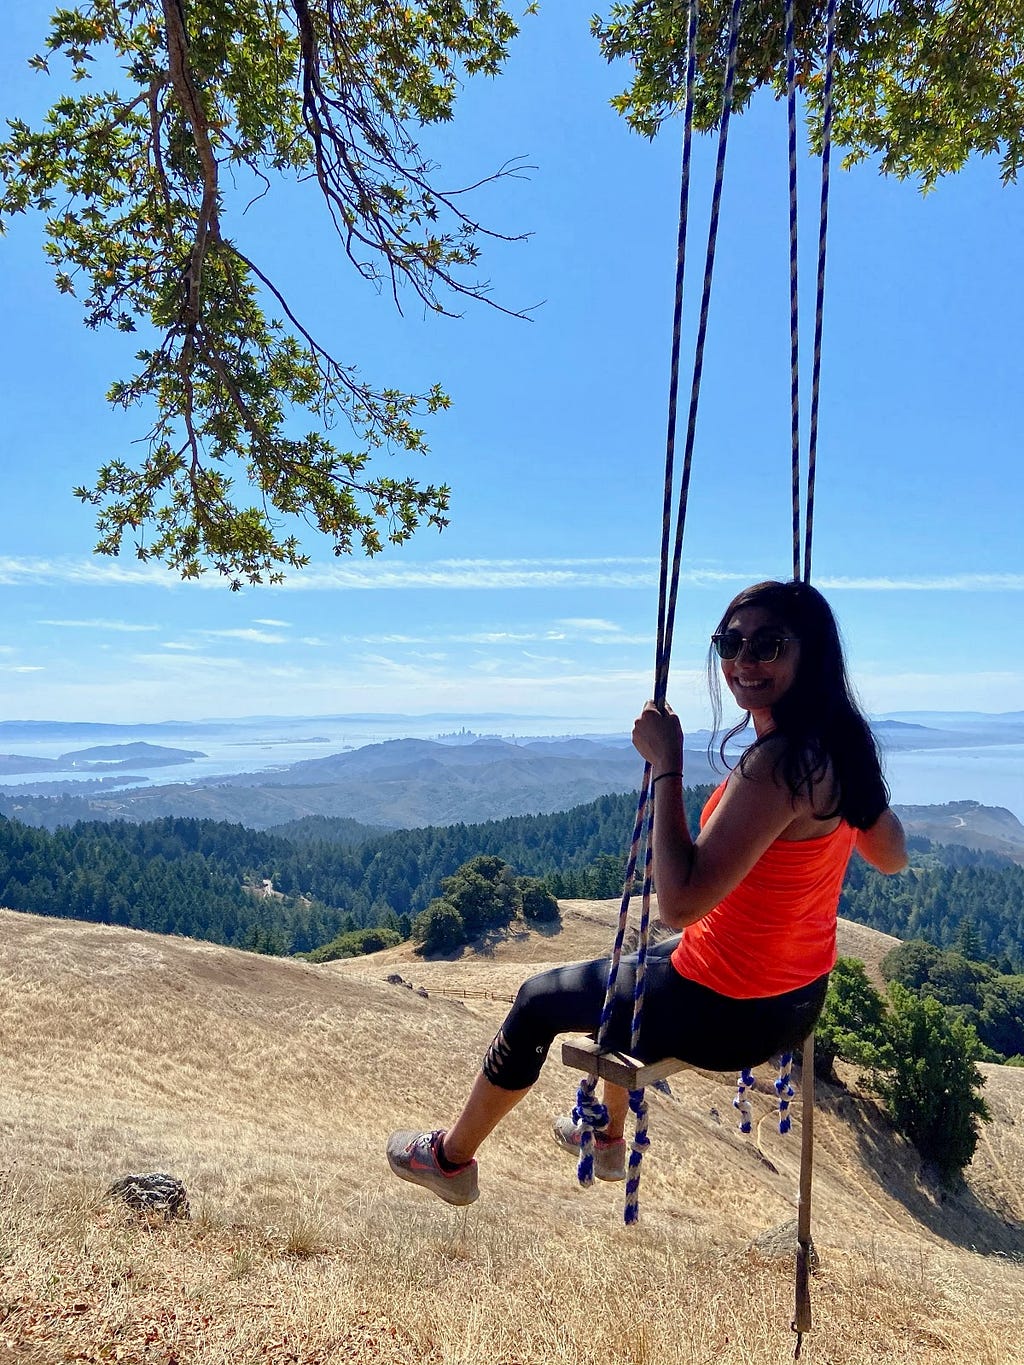 Harshita sits on a swing at the top of Mt. Tamalpais, overlooking the Bay Area.